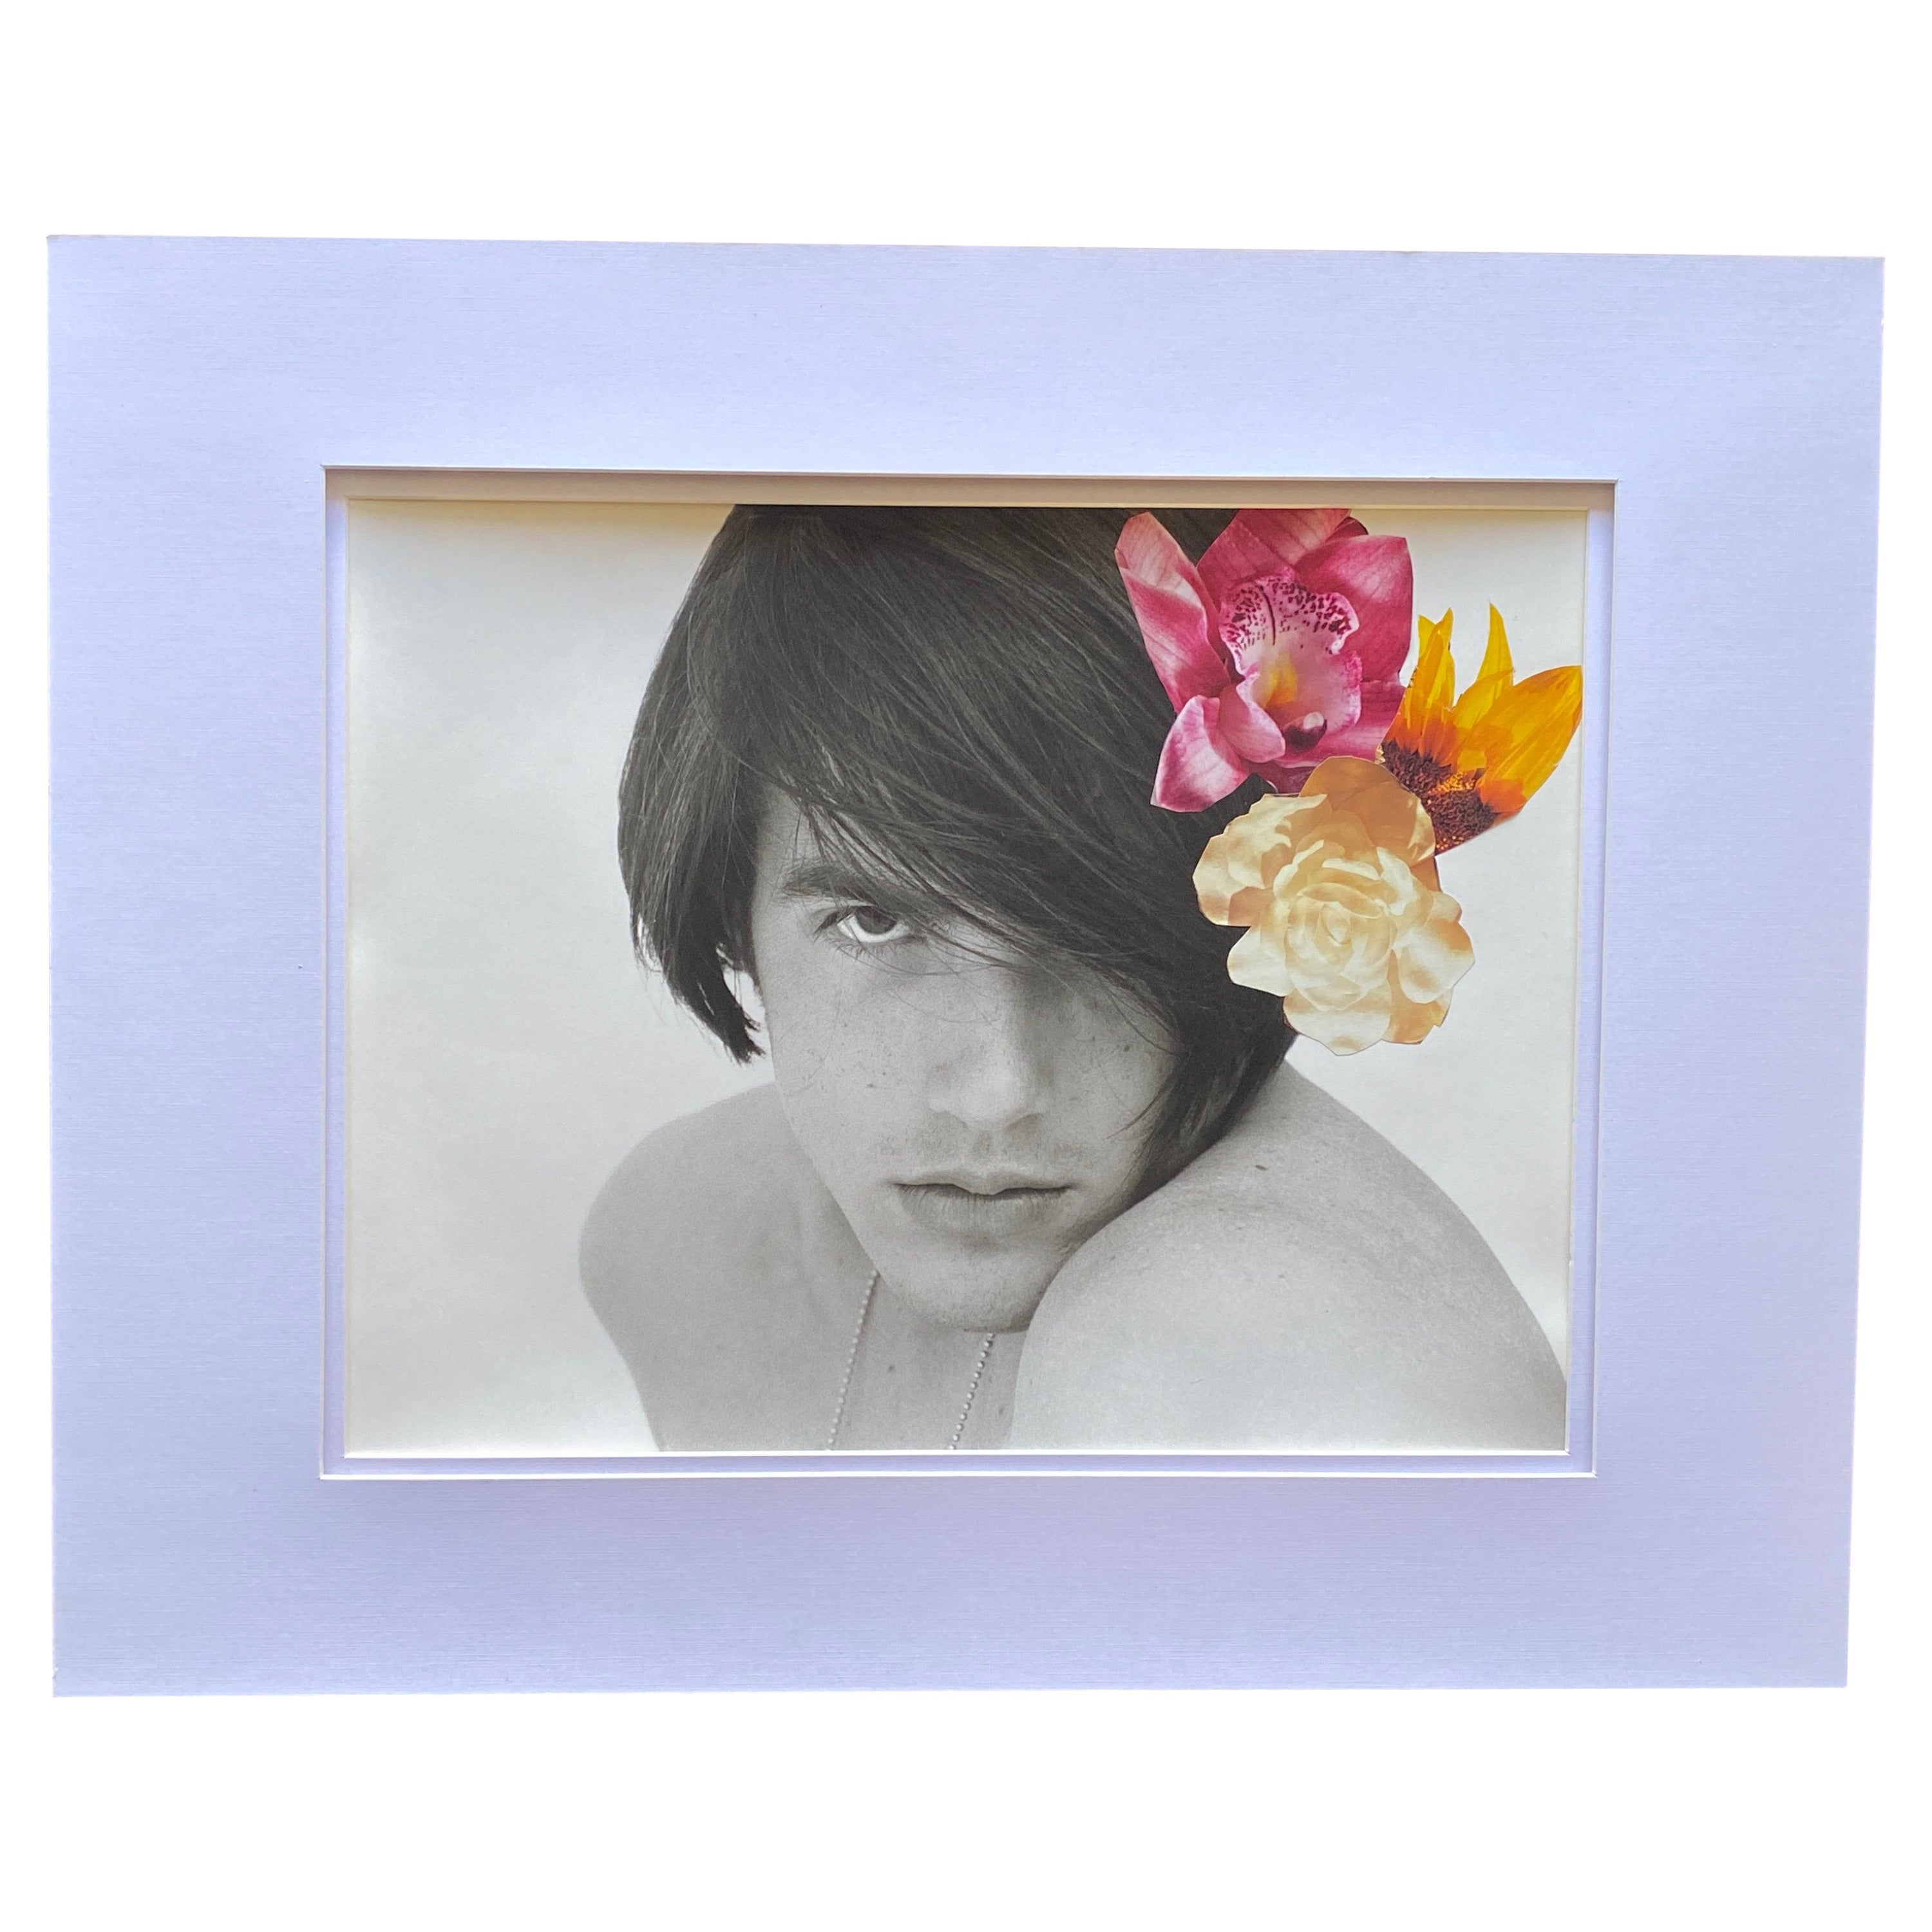 George Machado Orig B&WPhotograph Male Portrait “One of a Kind Collage” Series For Sale